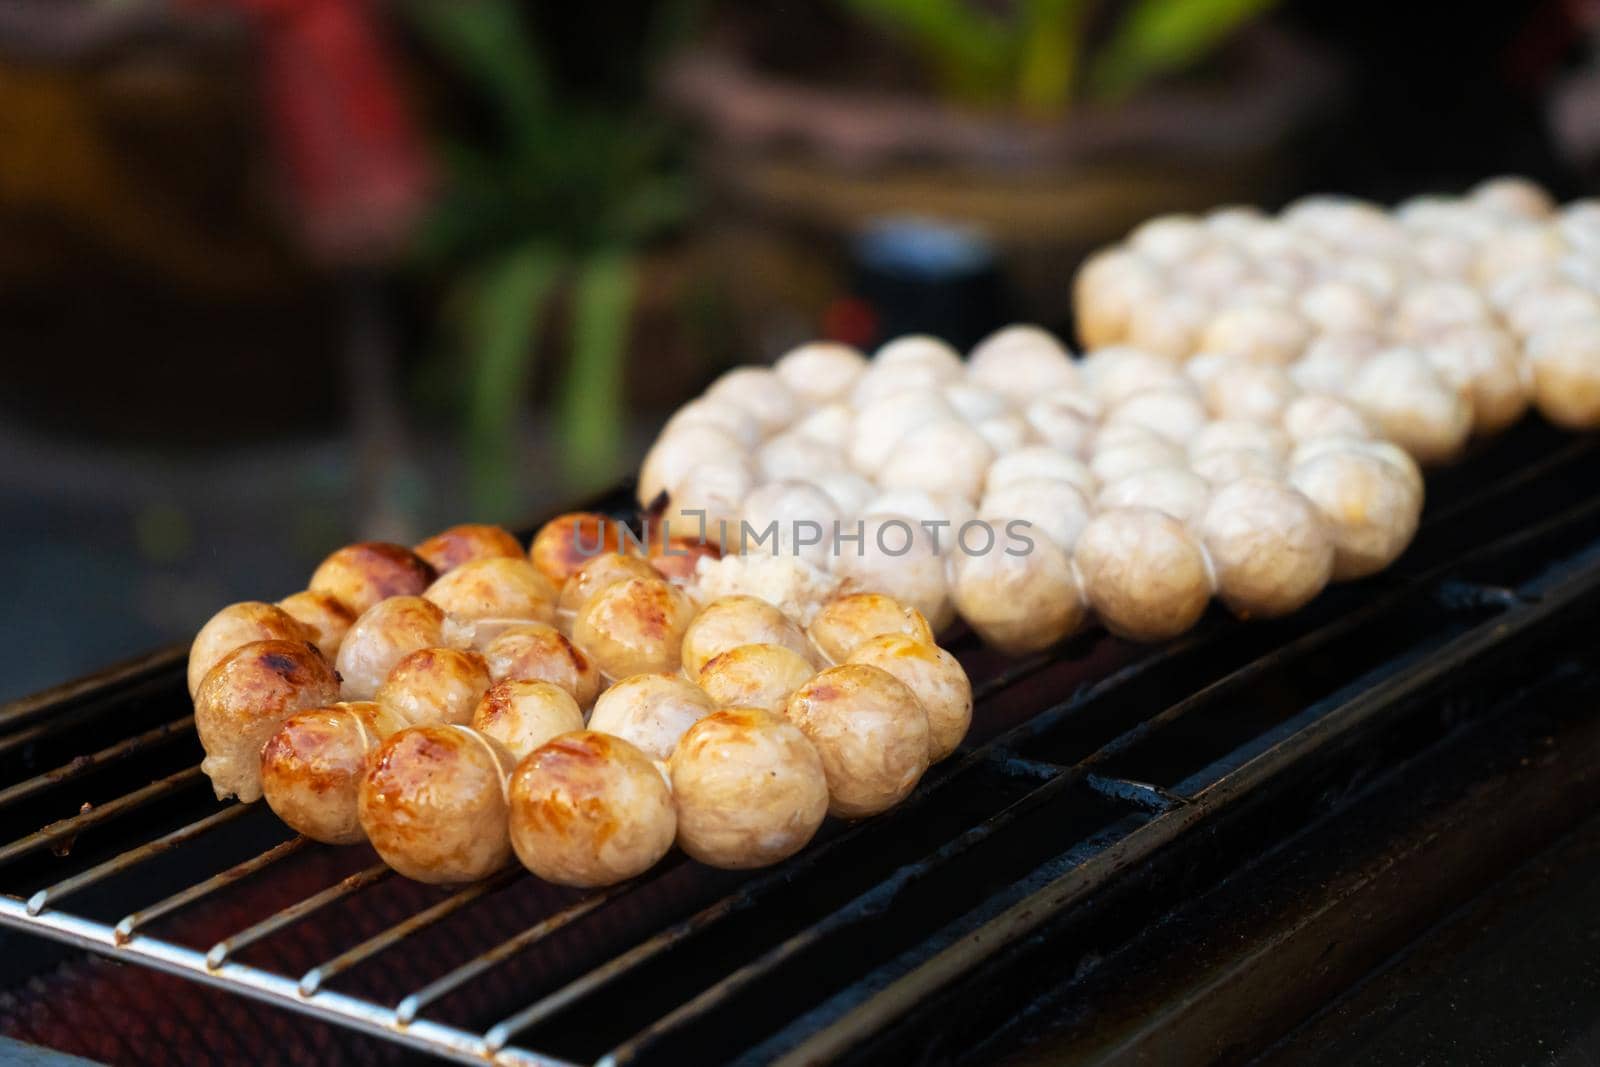 Meatballs are fried on an open-air stove at a street food market in Asia by Try_my_best